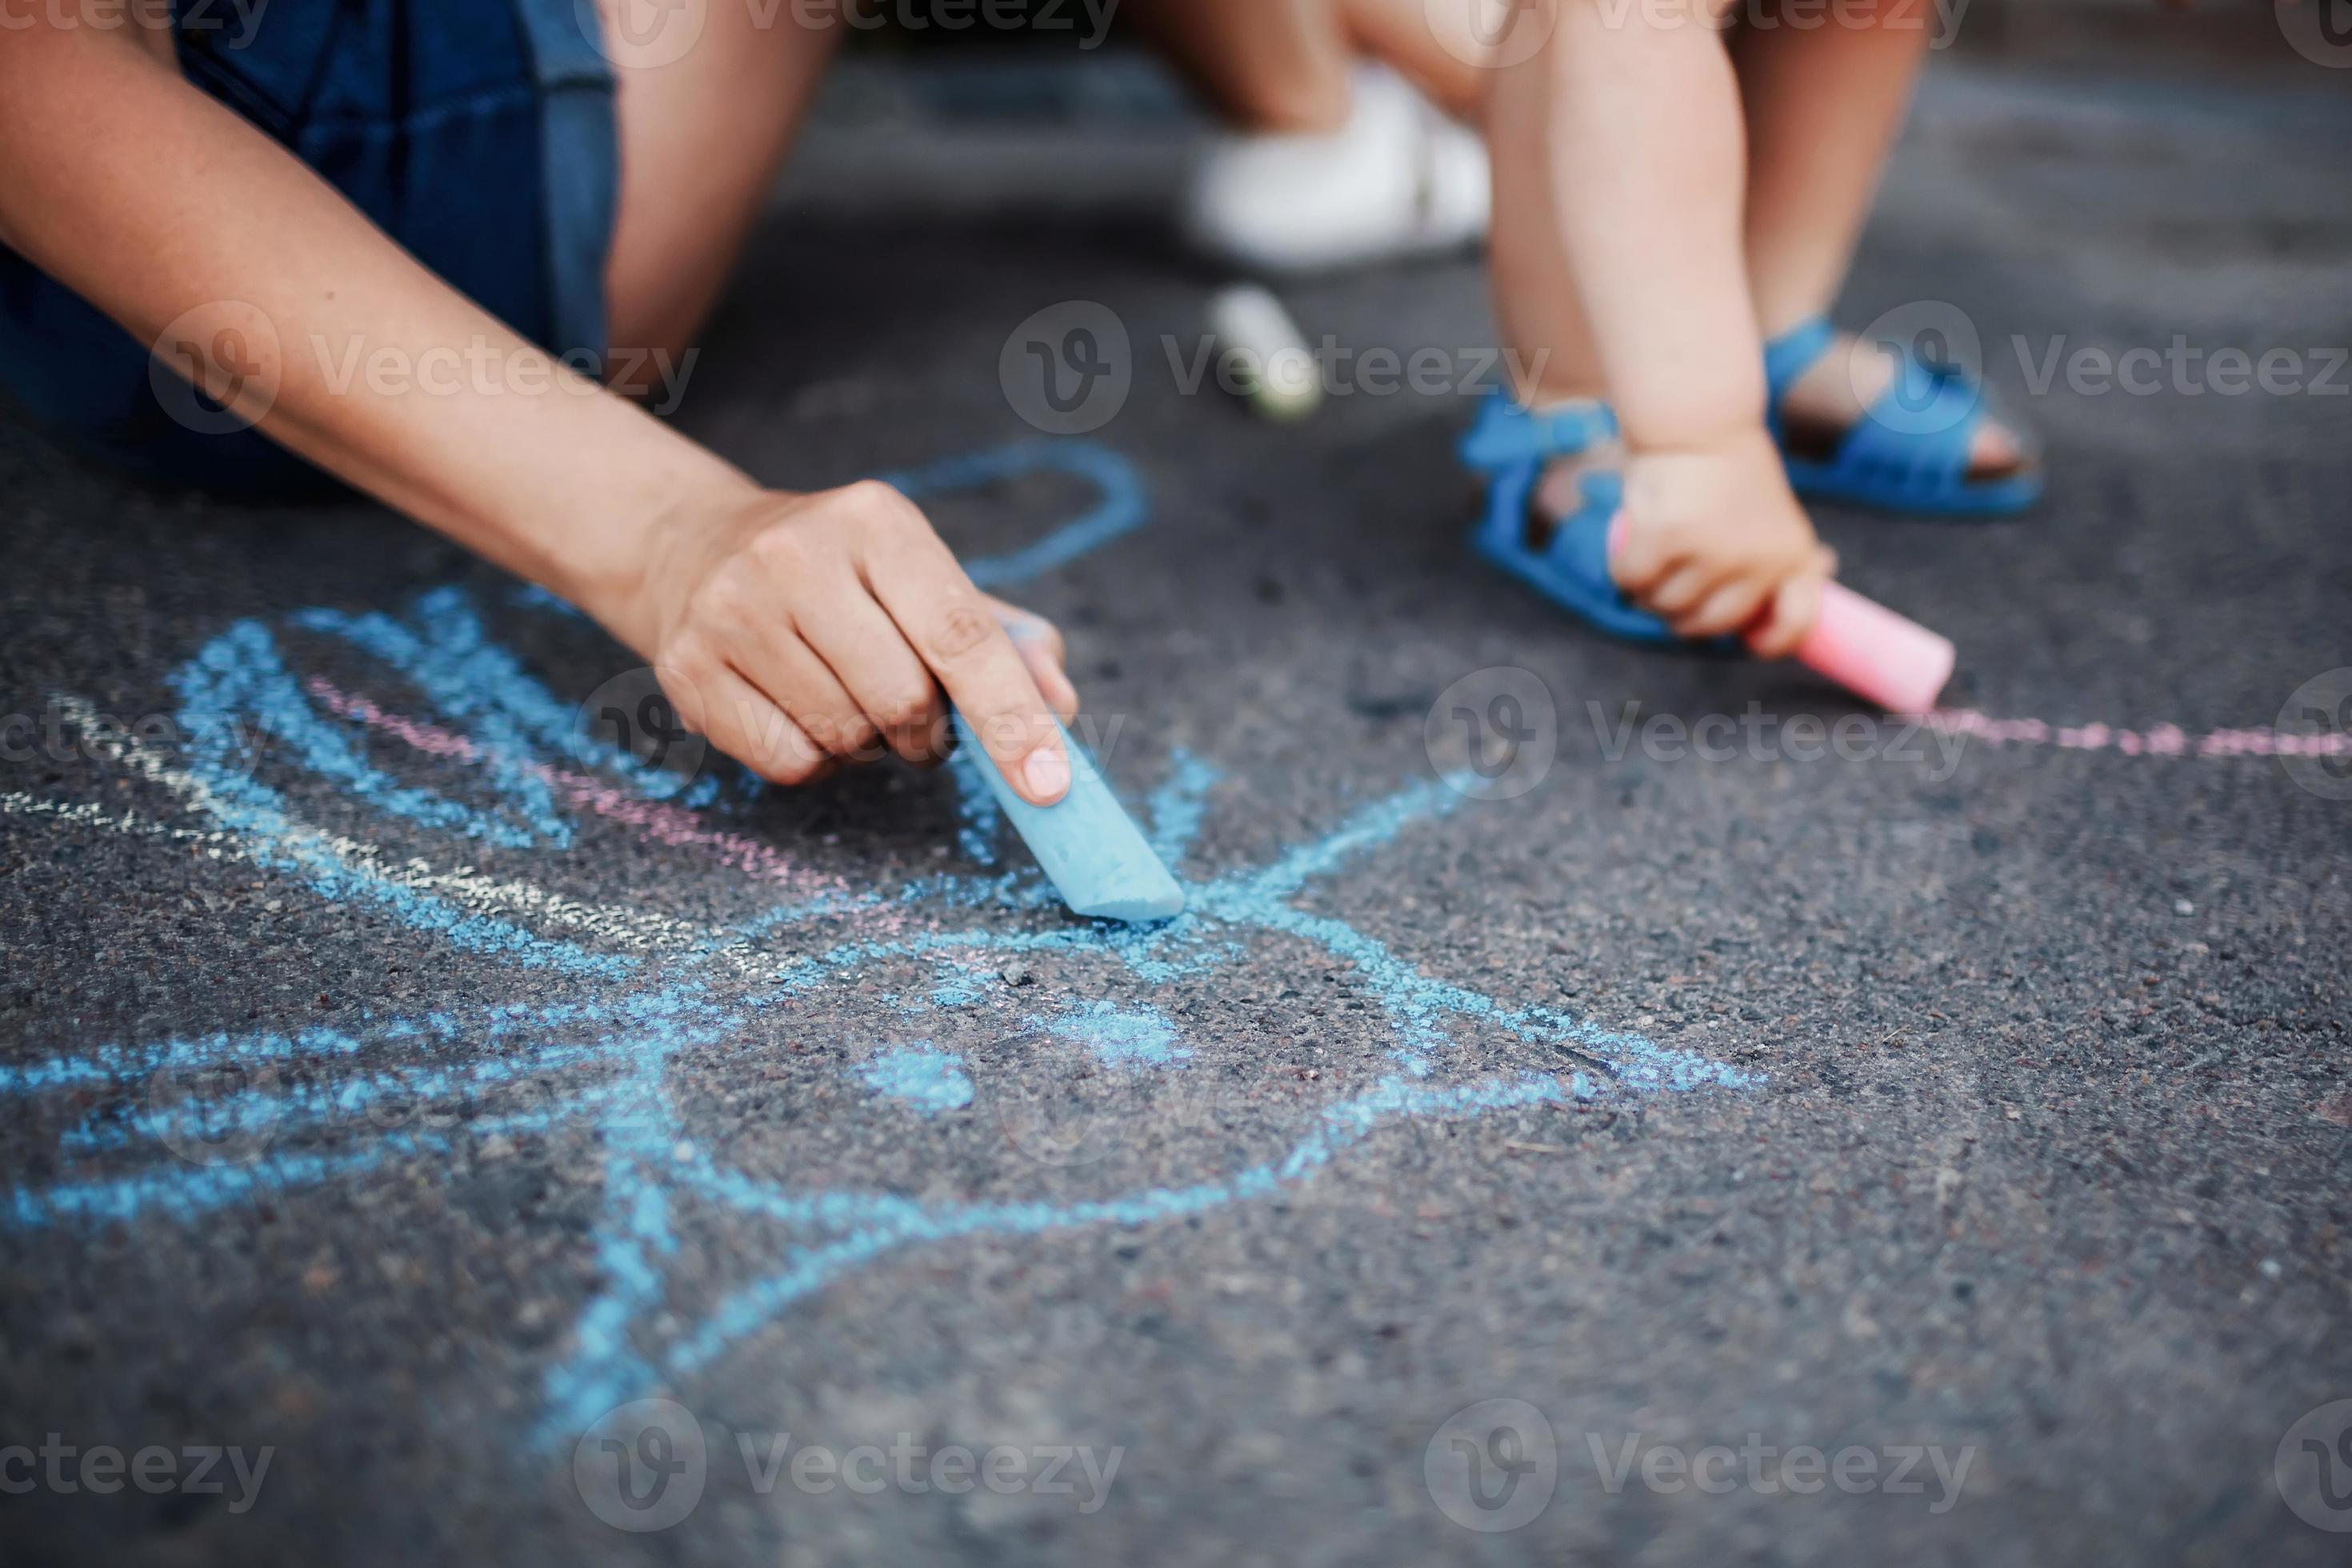 19 Fun Chalk Ideas To Use For Kids' Educational Activities